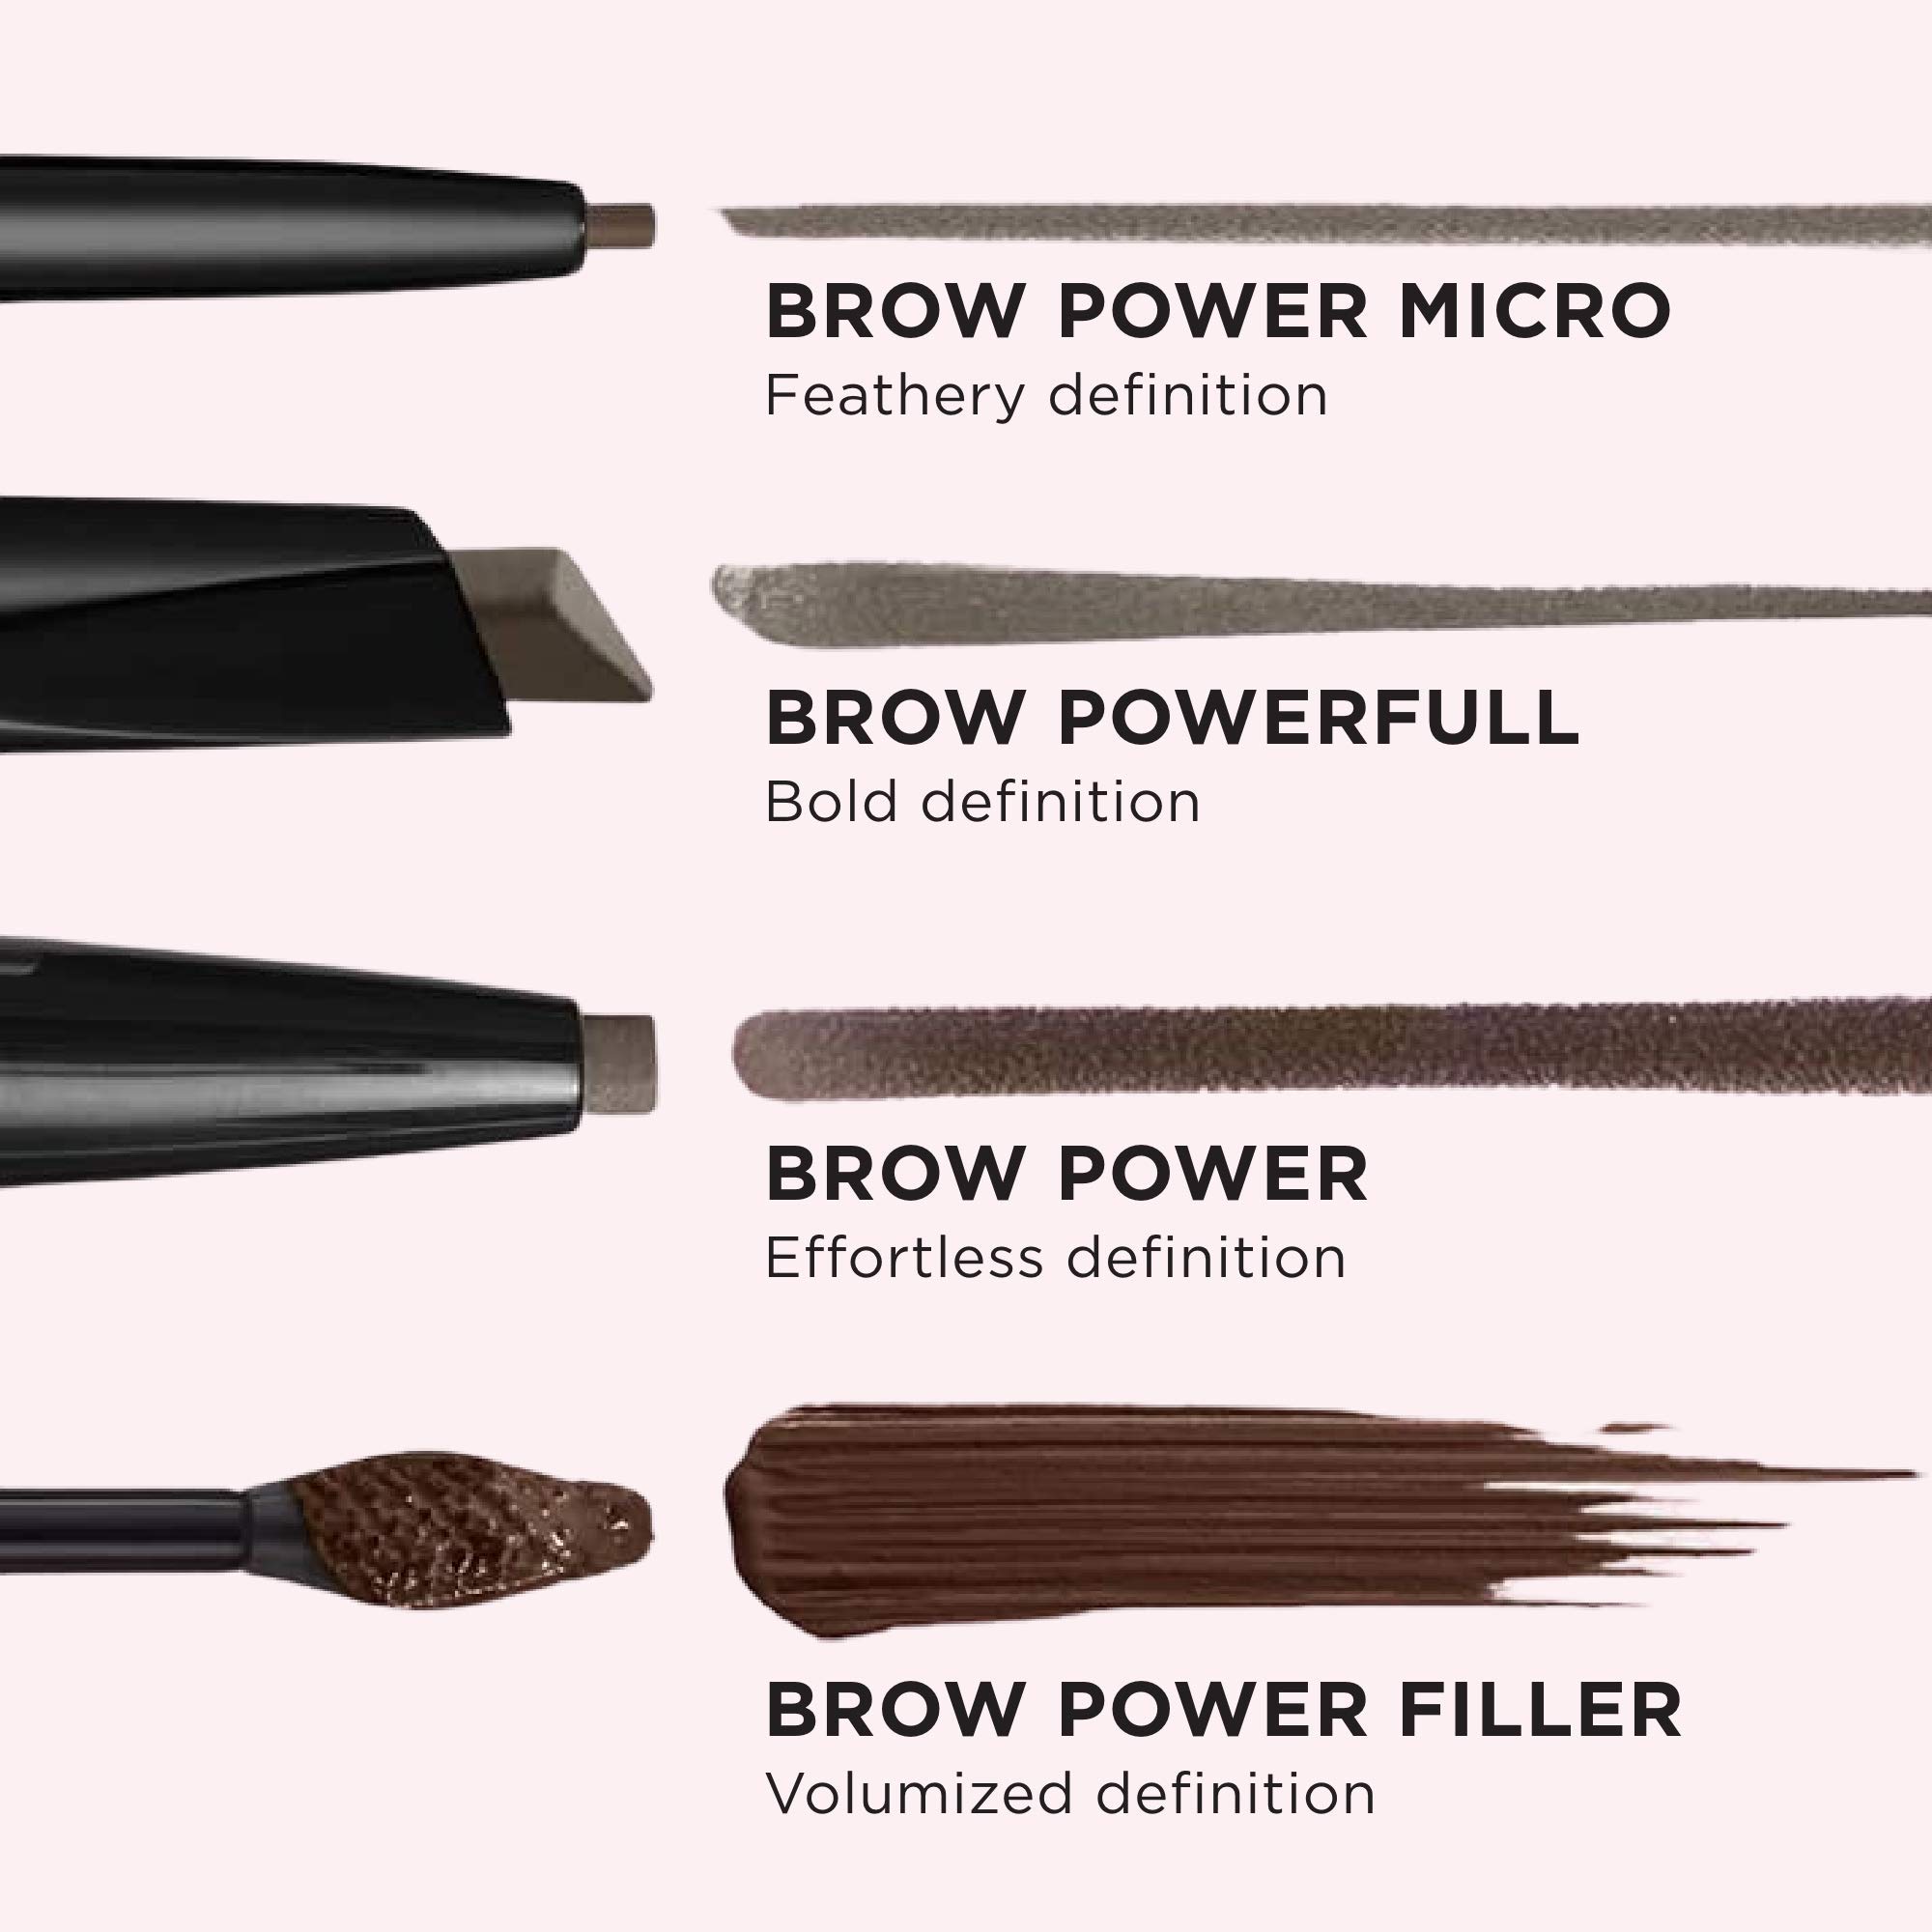 IT Cosmetics Brow Power Filler, Universal Taupe - Volumizing Tinted Fiber Brow Gel - Instantly Fills, Shapes & Sets Your Brows - Waterproof Formula Lasts Up To 16 Hours - 0.14 fl oz